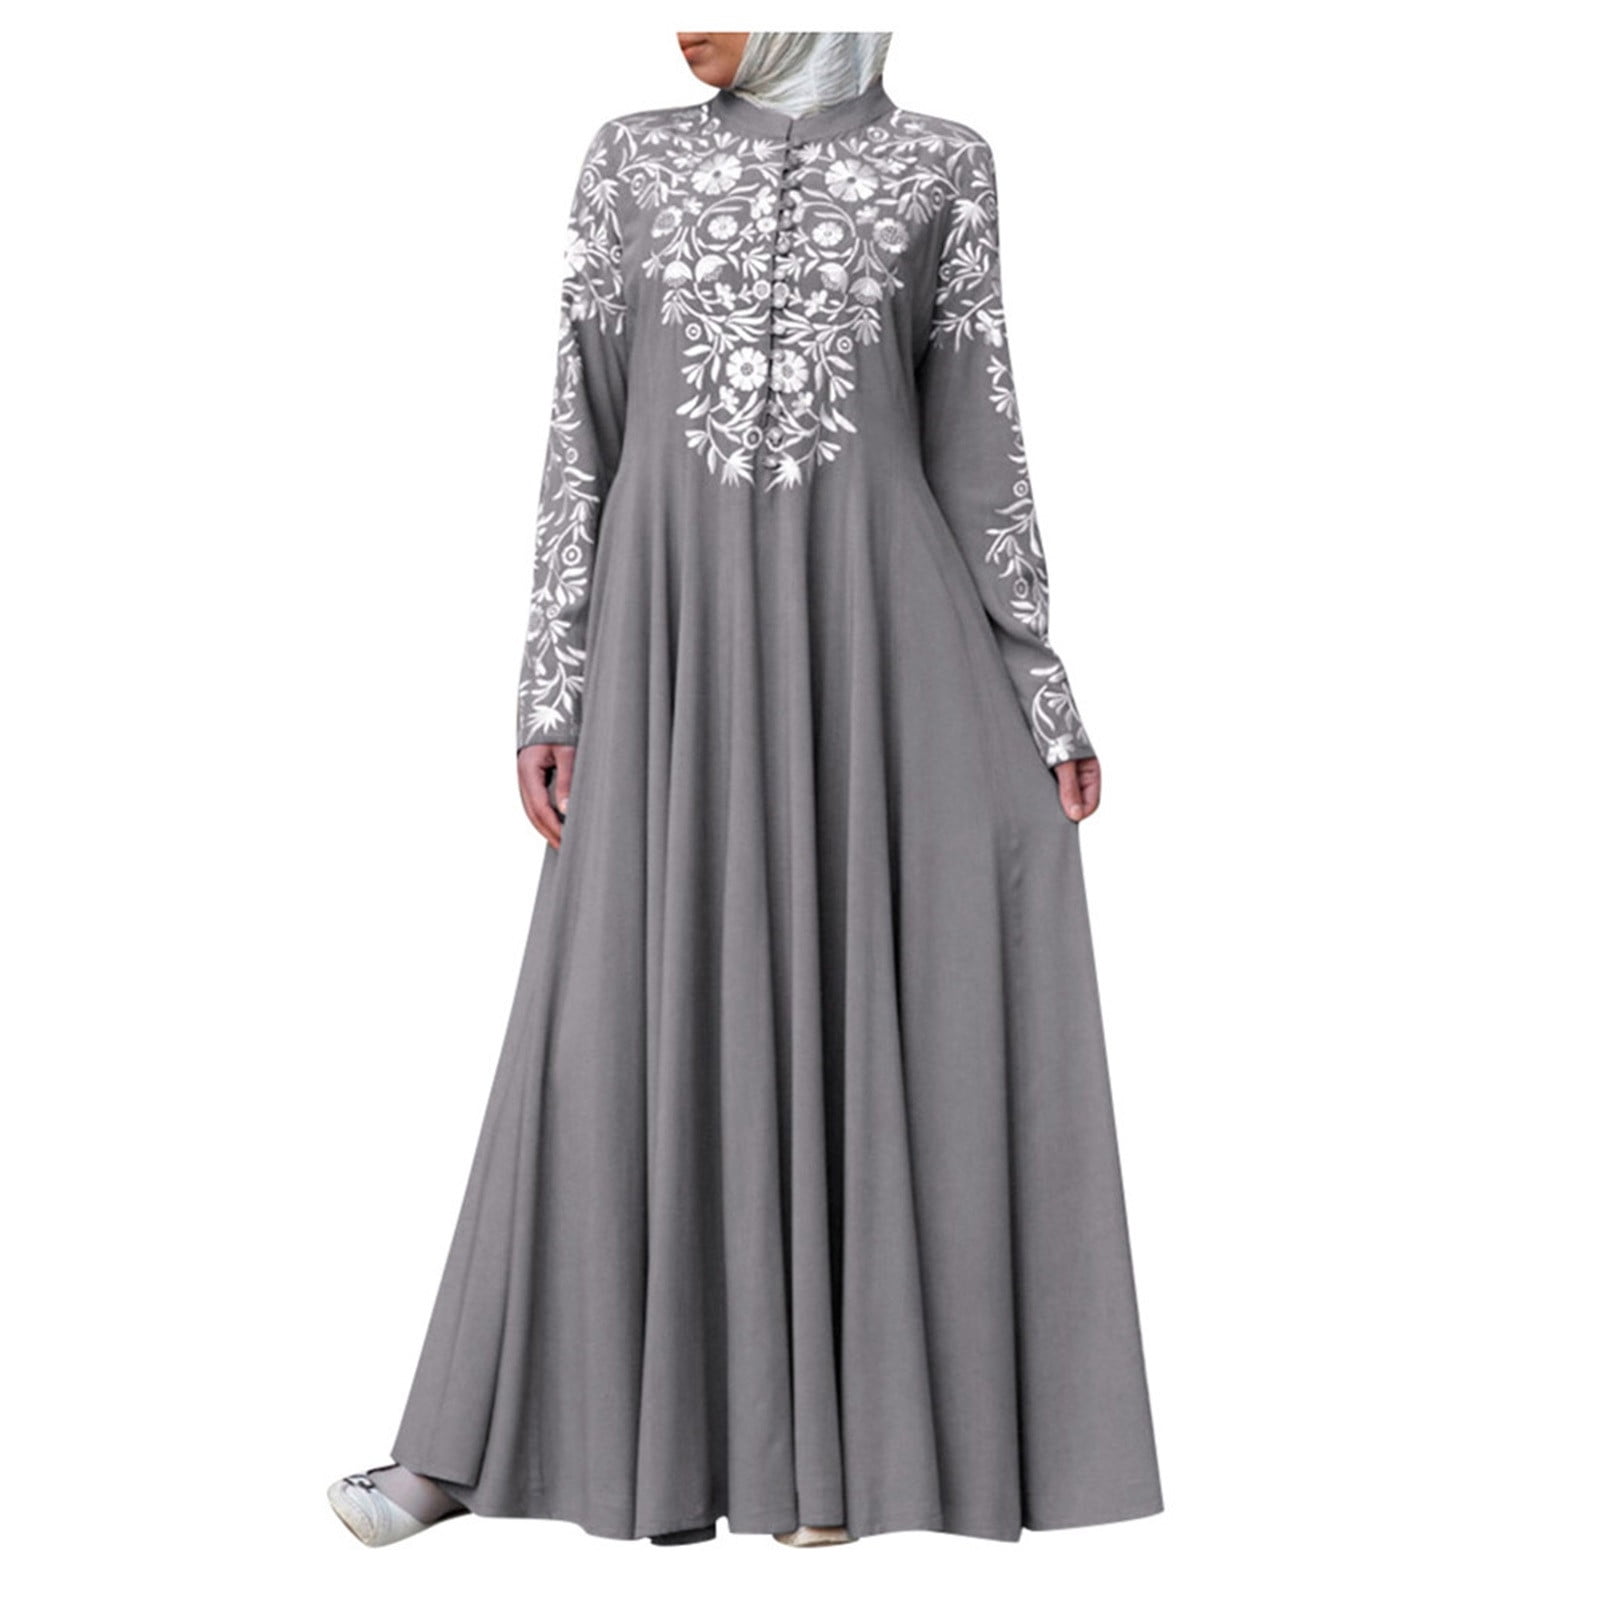 Georgette Indian Gowns - Buy Indian Gown online at Clothsvilla.com